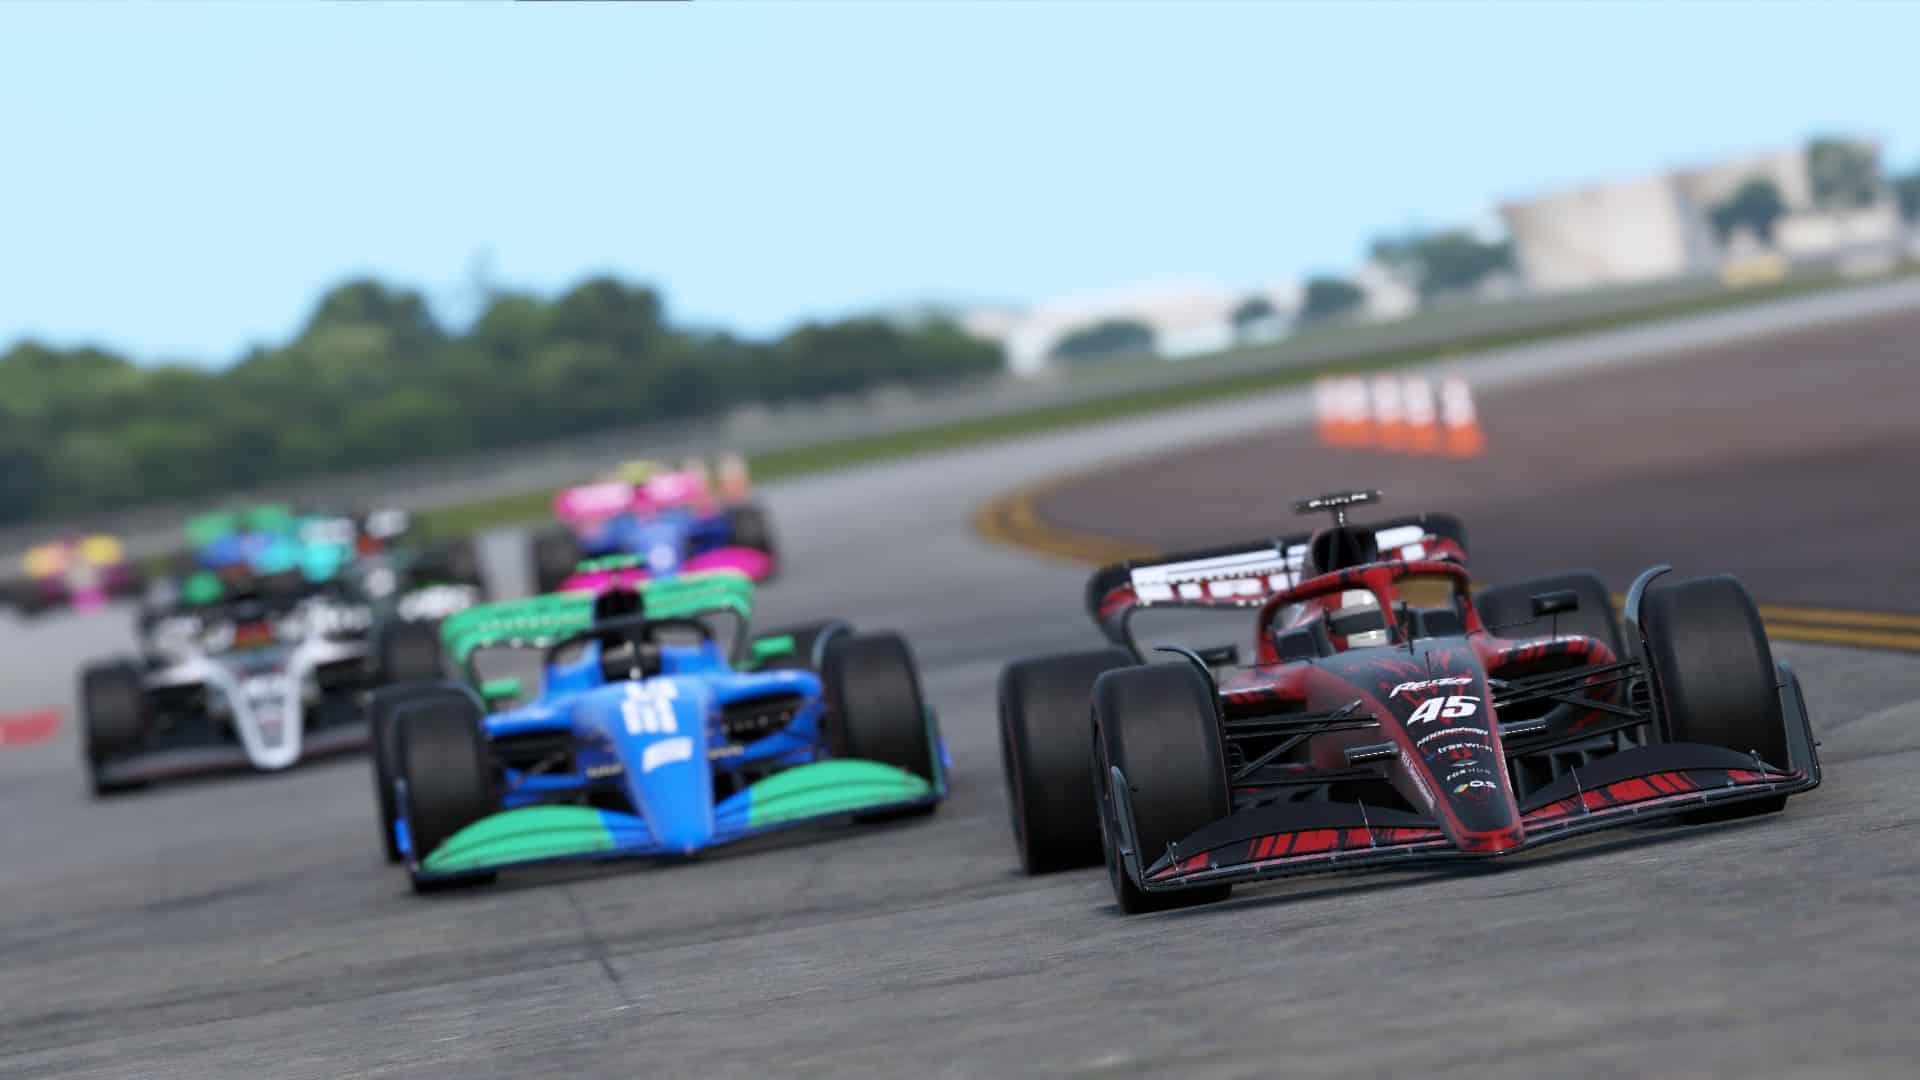 Latest Automobilista 2 V1.3.7.1 update continues to refine existing content